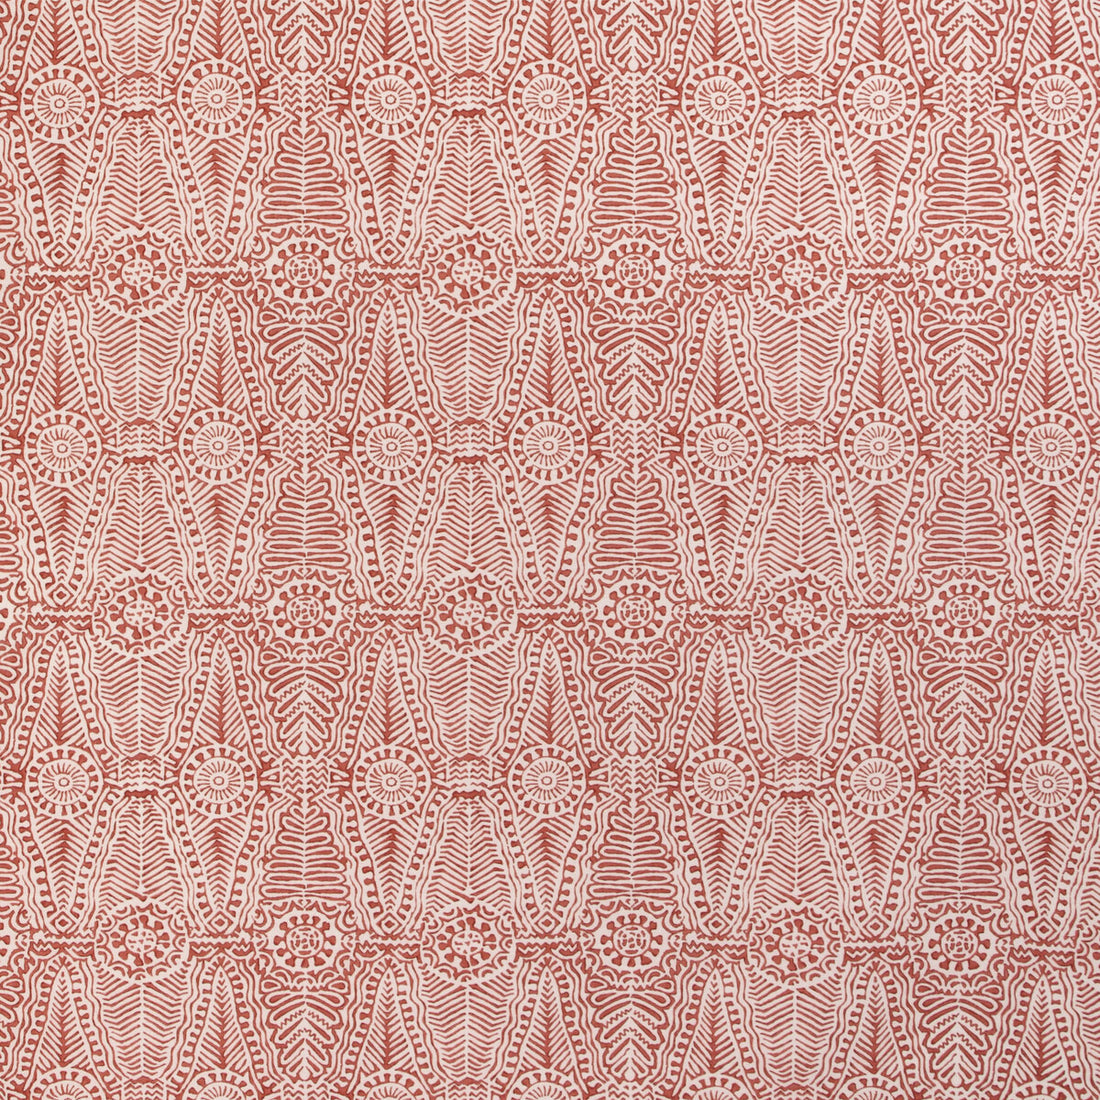 Drayton Print fabric in rust color - pattern 2020184.24.0 - by Lee Jofa in the Clare Prints collection